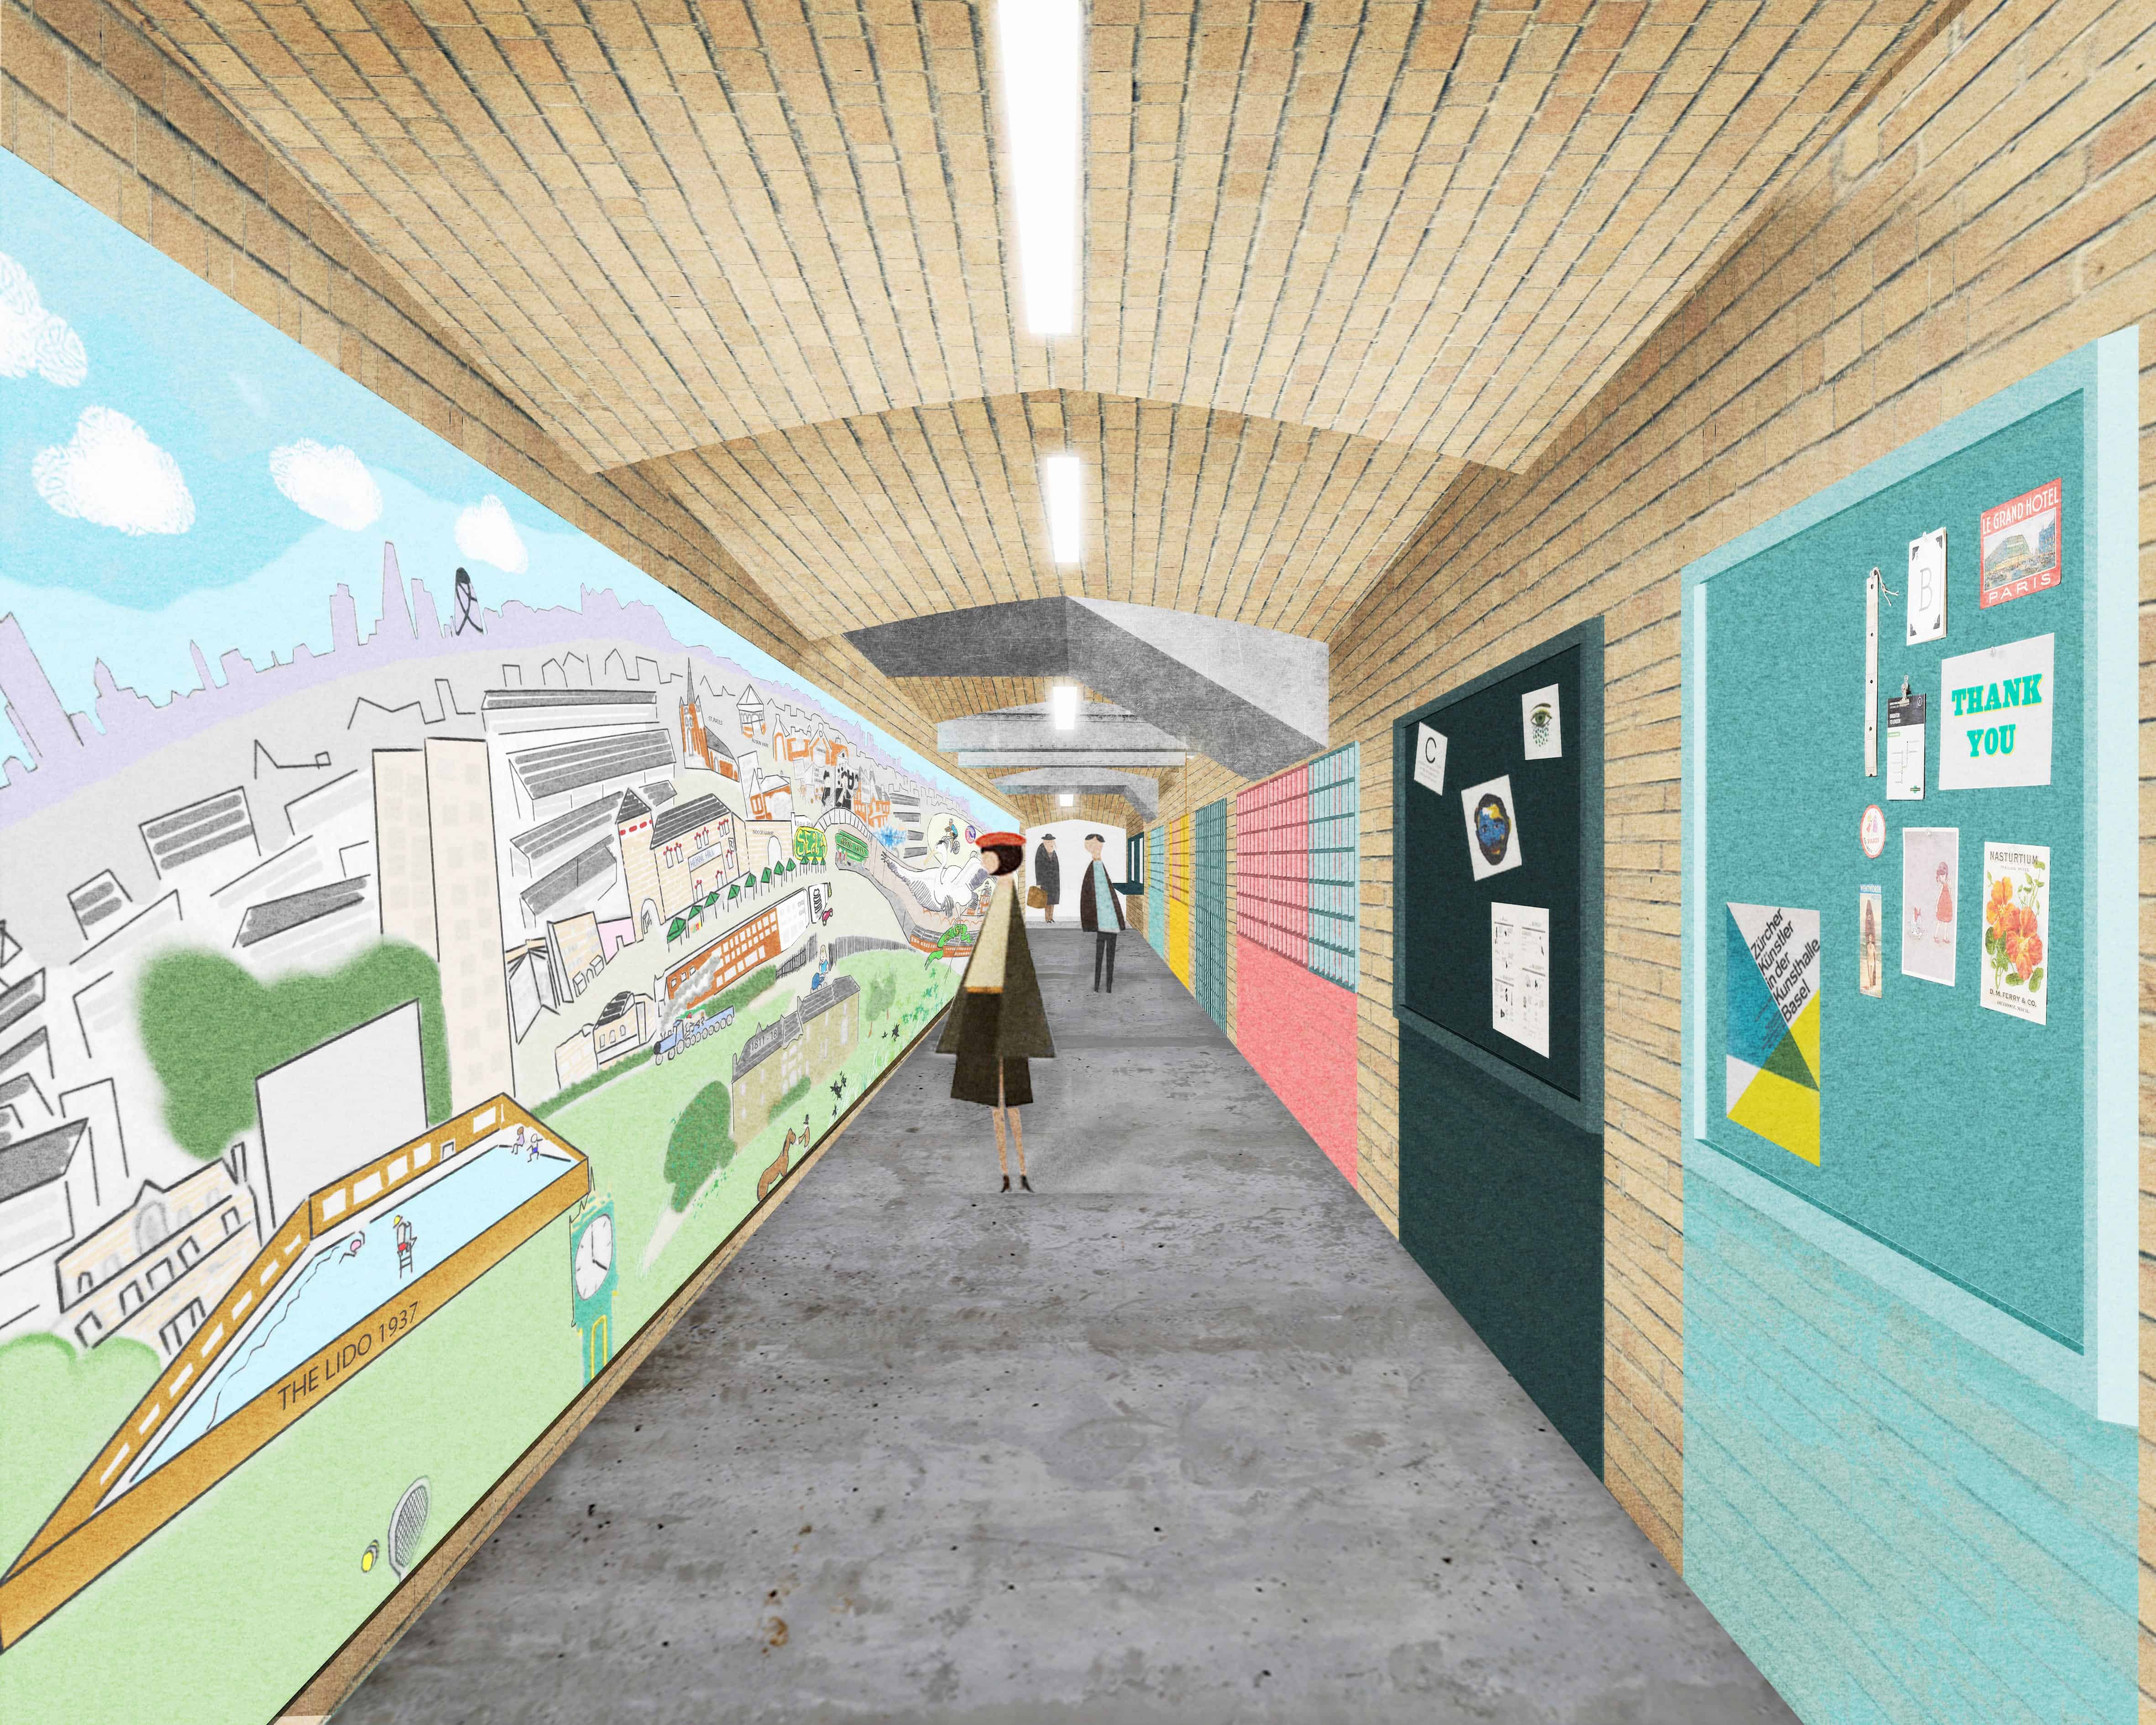 Artist's impression of completed mural